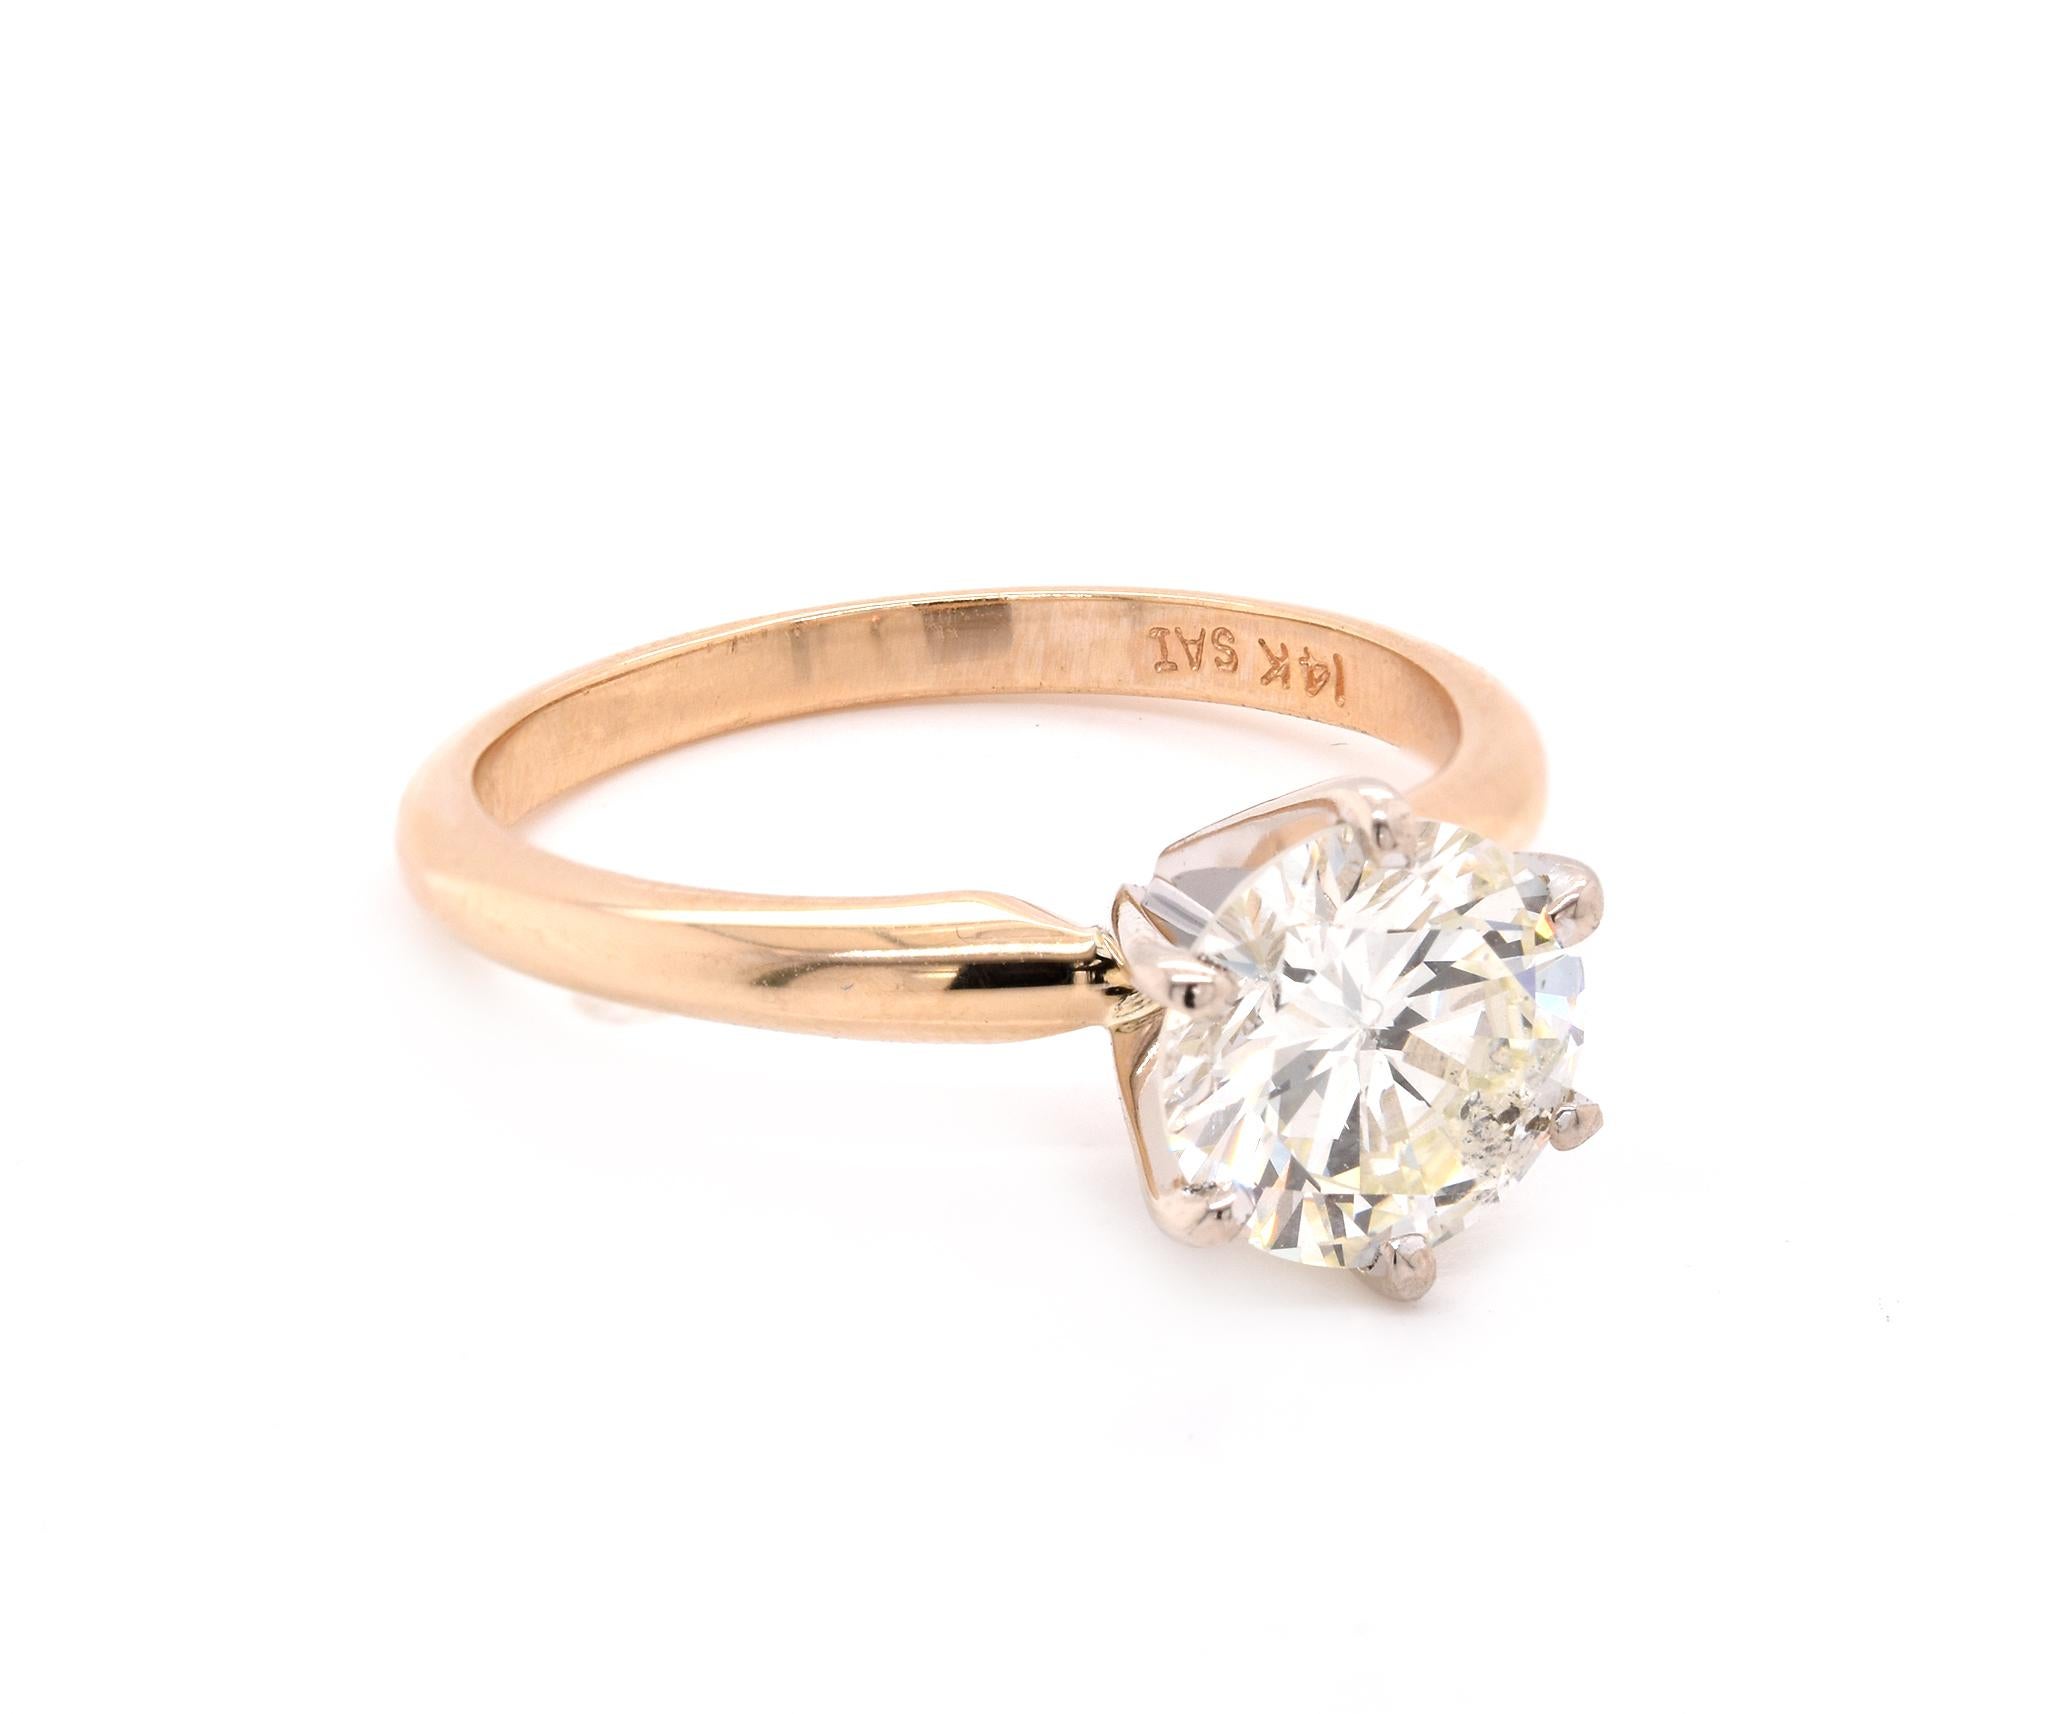 Material: 14K yellow gold
Center Diamond: 1 round brilliant cut = 1.64ct
Color: K
Clarity: I1
Ring Size: 7 (please allow up to 2 additional business days for sizing requests)
Dimensions: ring shank measures 2mm
Weight: 3.25 grams